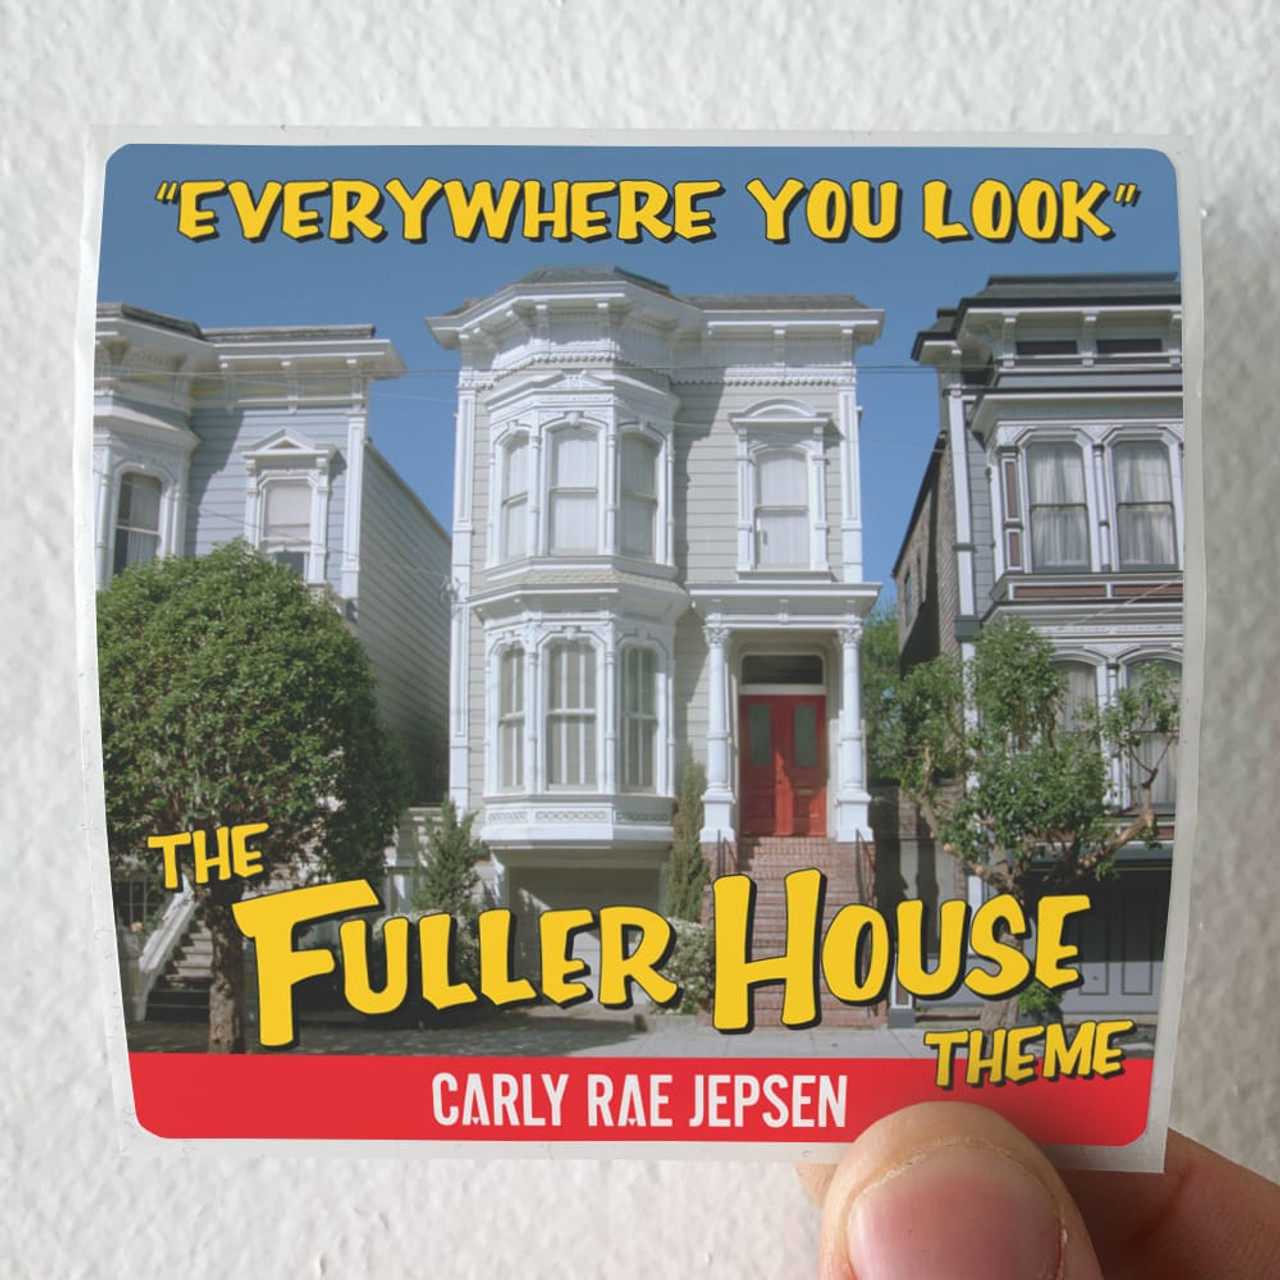 Everywhere you look, brands are talking about Fuller House